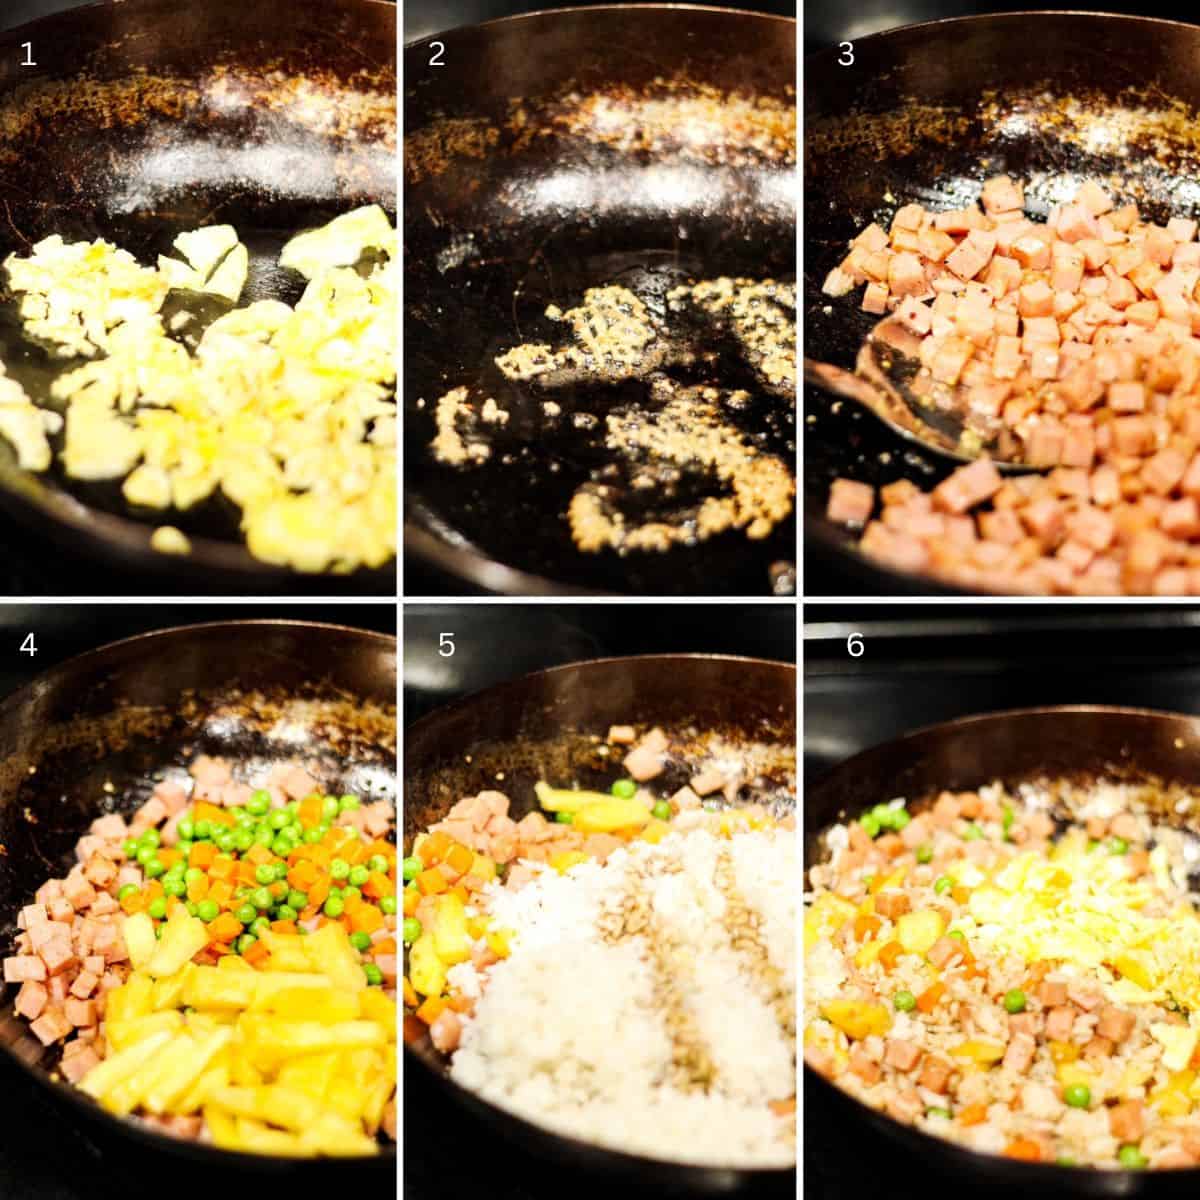 Step by step instructions to make fried rice rice with spam and pineapple.